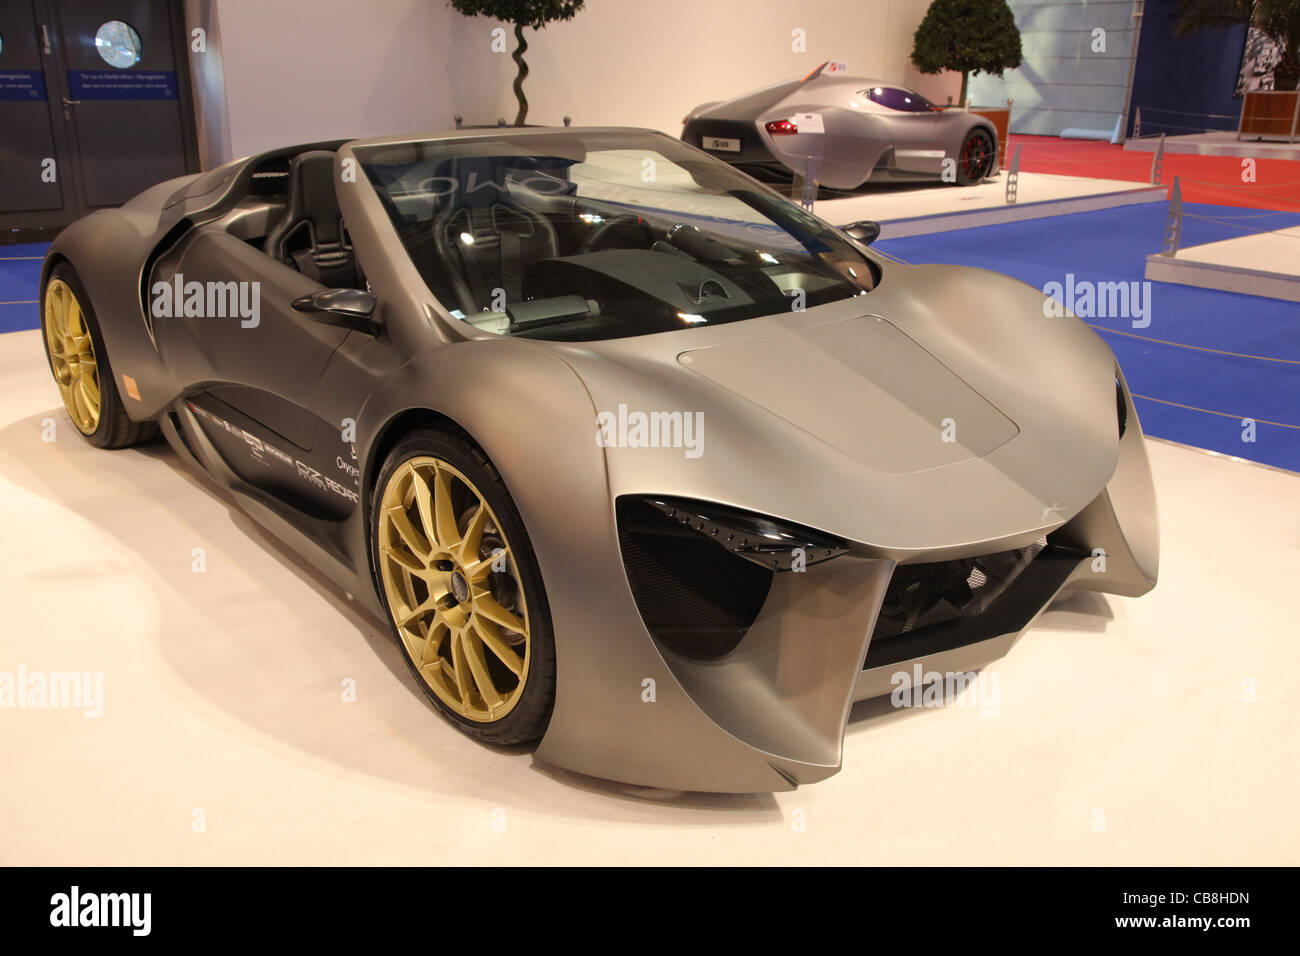 Sbarro Speed Glasfiber Coupe shown at the Essen Motor Show in Essen, Germany, on November 29, 2011 Stock Photo